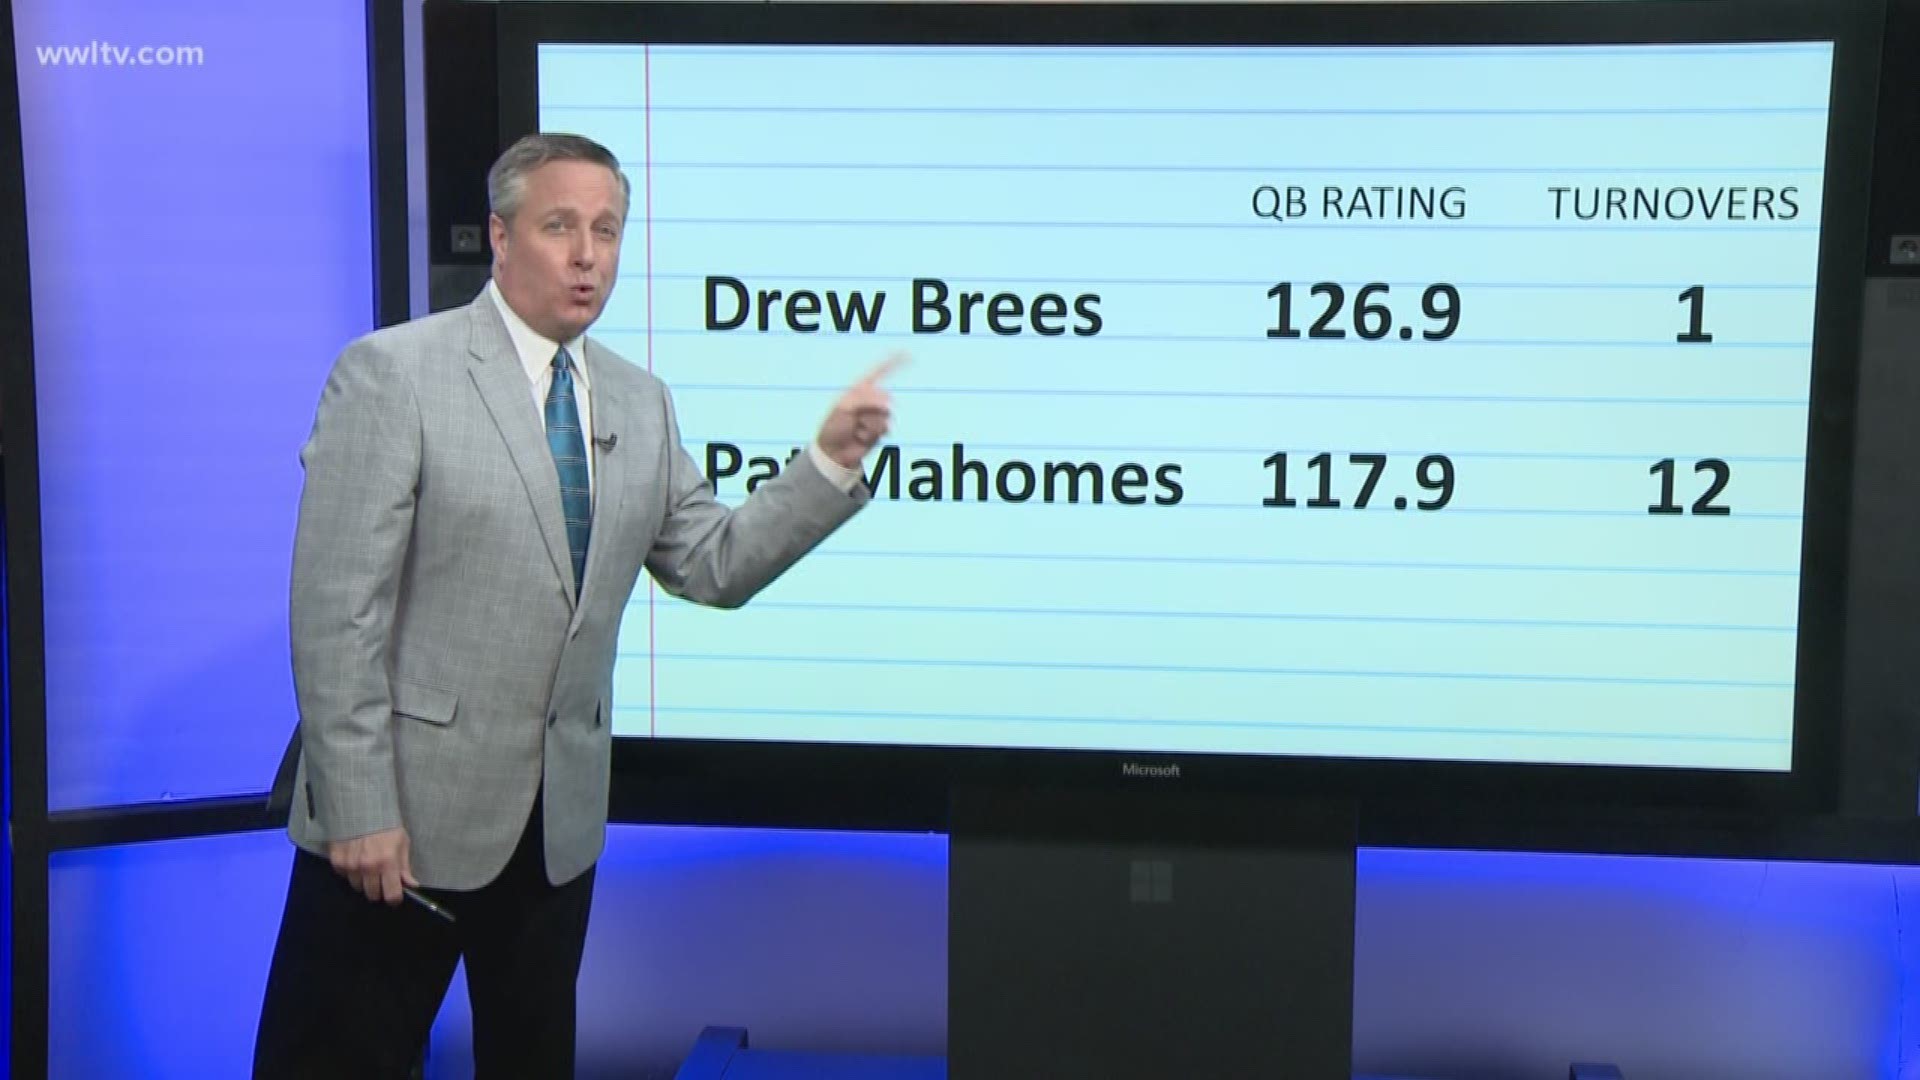 Drew Brees is way ahead of all the rest.